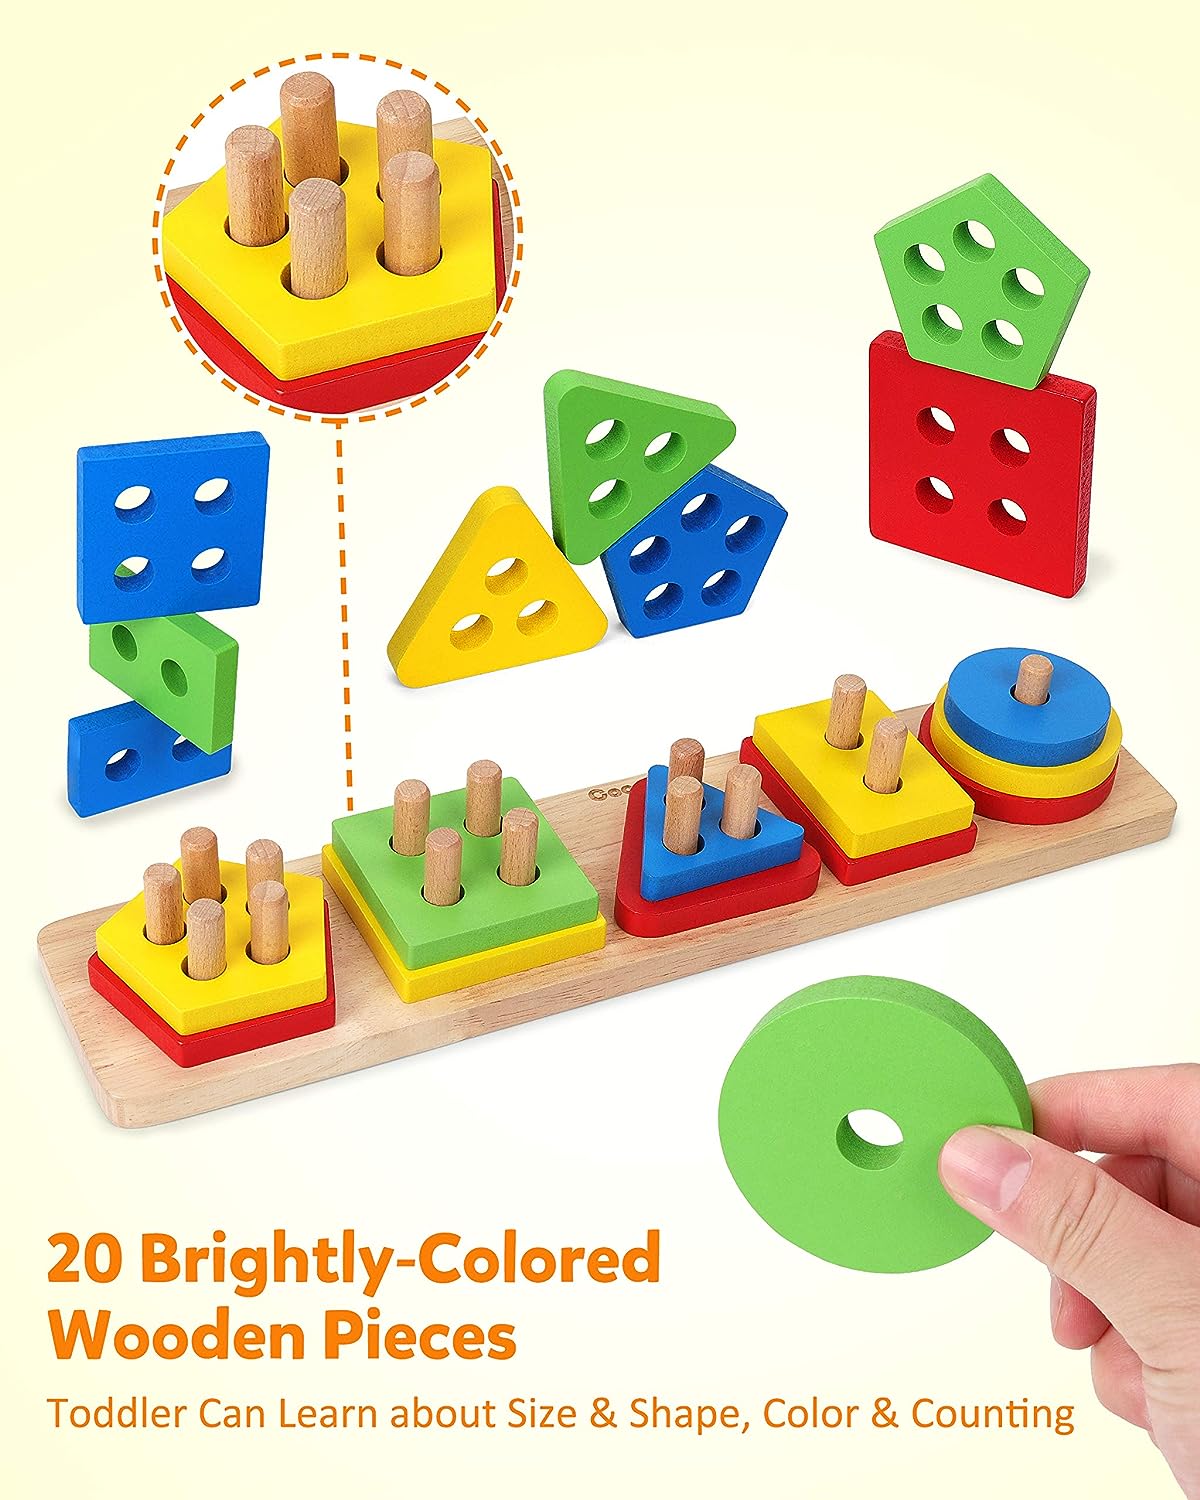 Coogam Wooden Sorting Stacking Montessori Toys: A Fun and Educational Review